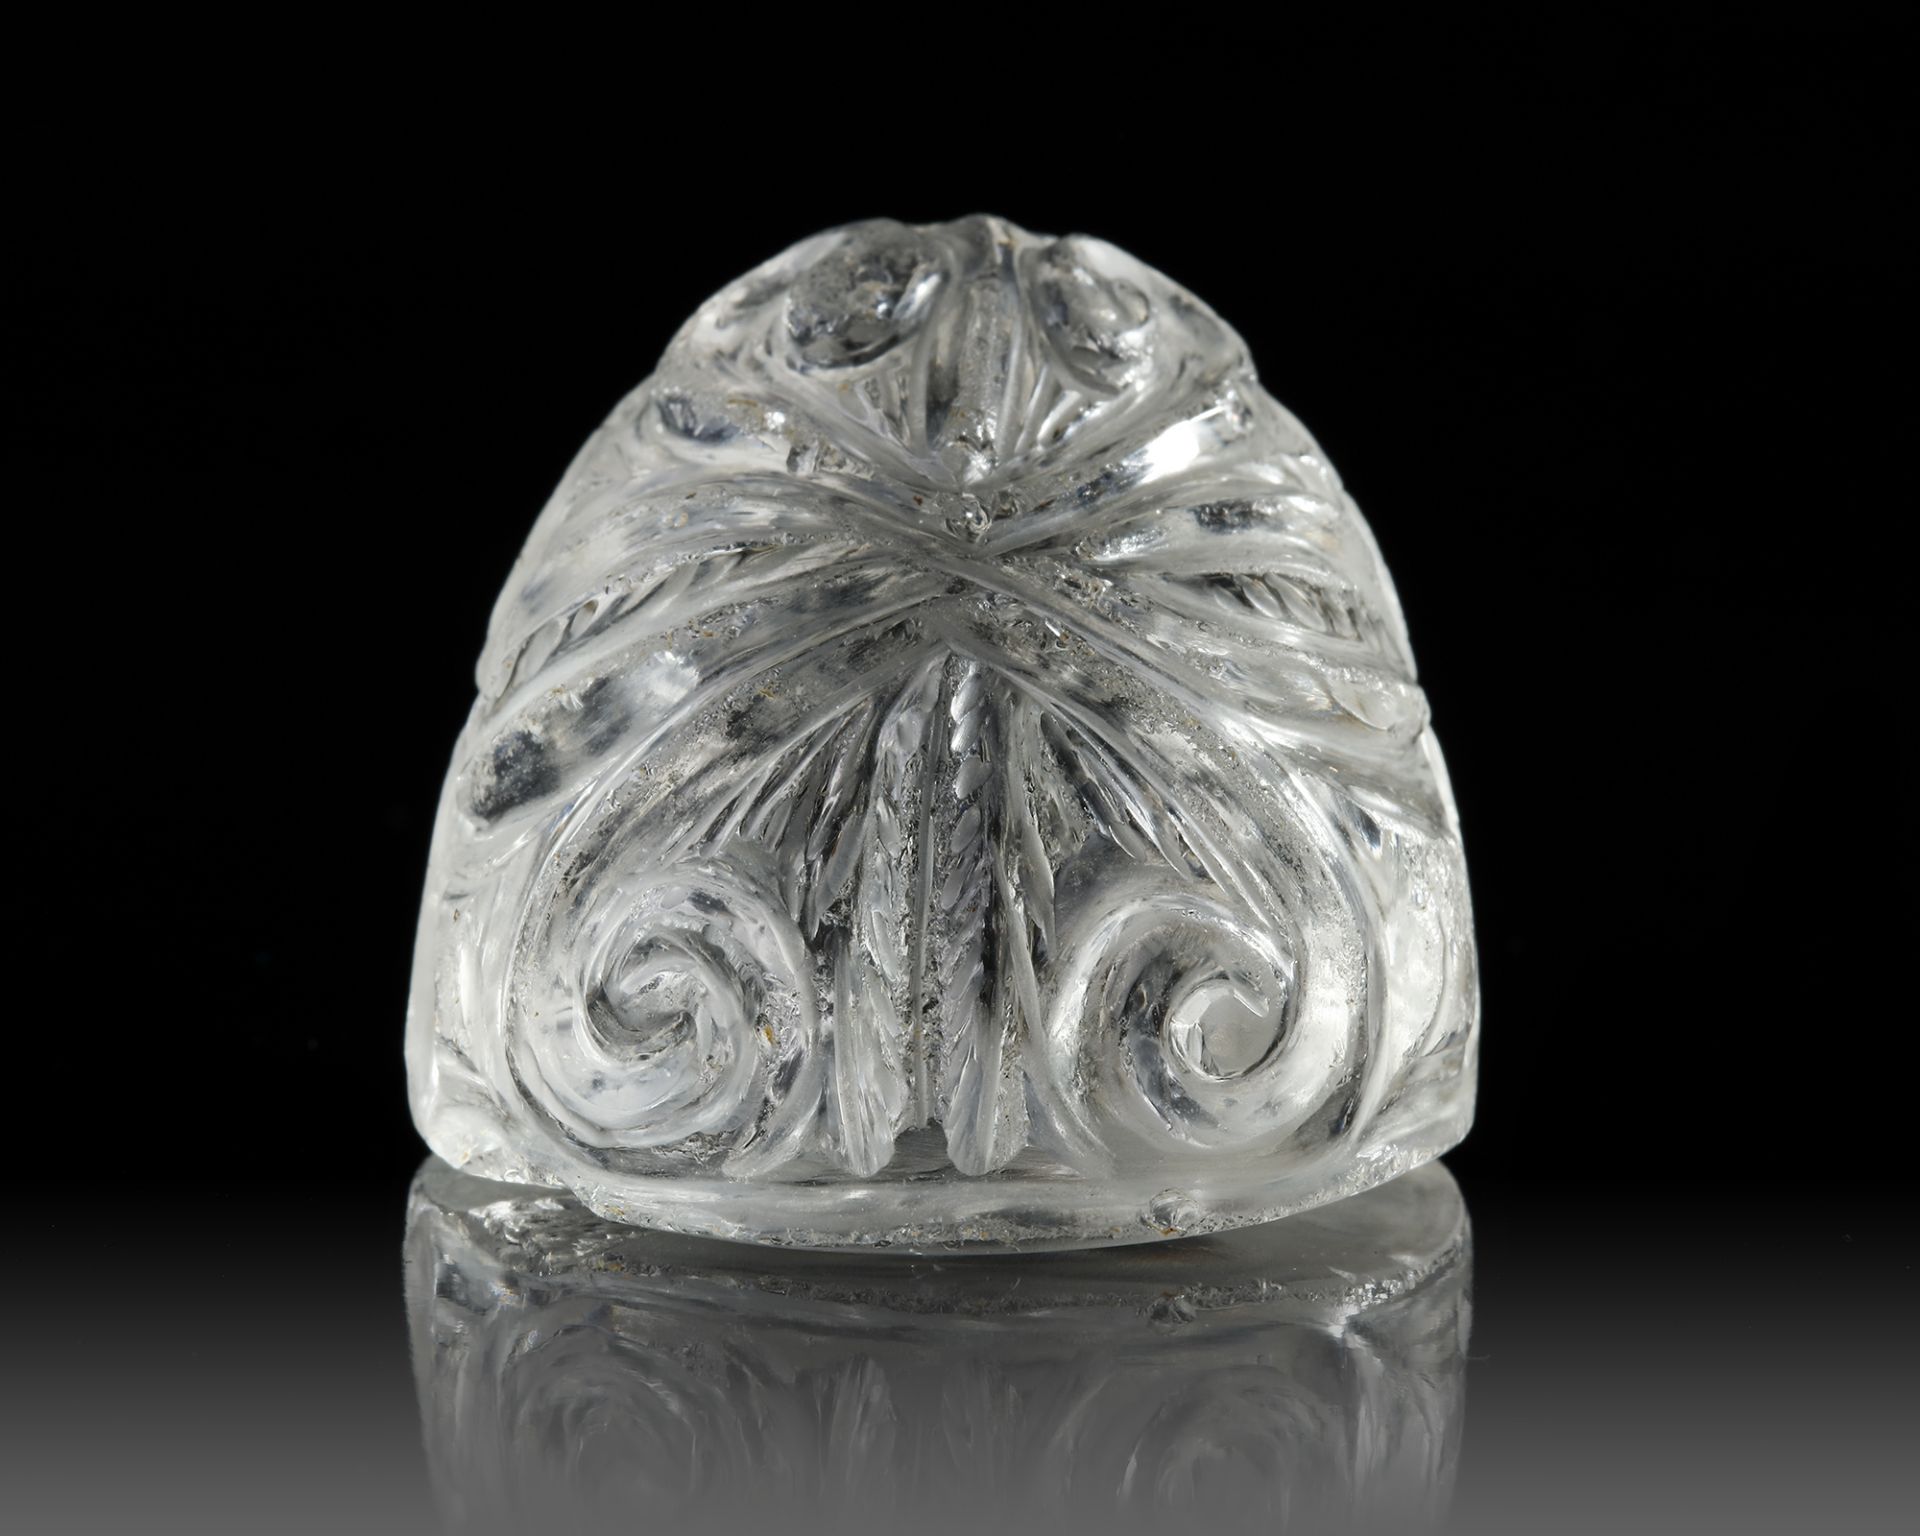 A FATIMID ROCK CRYSTAL CHESS PIECE, EGYPT, 11TH CENTURY - Image 2 of 6